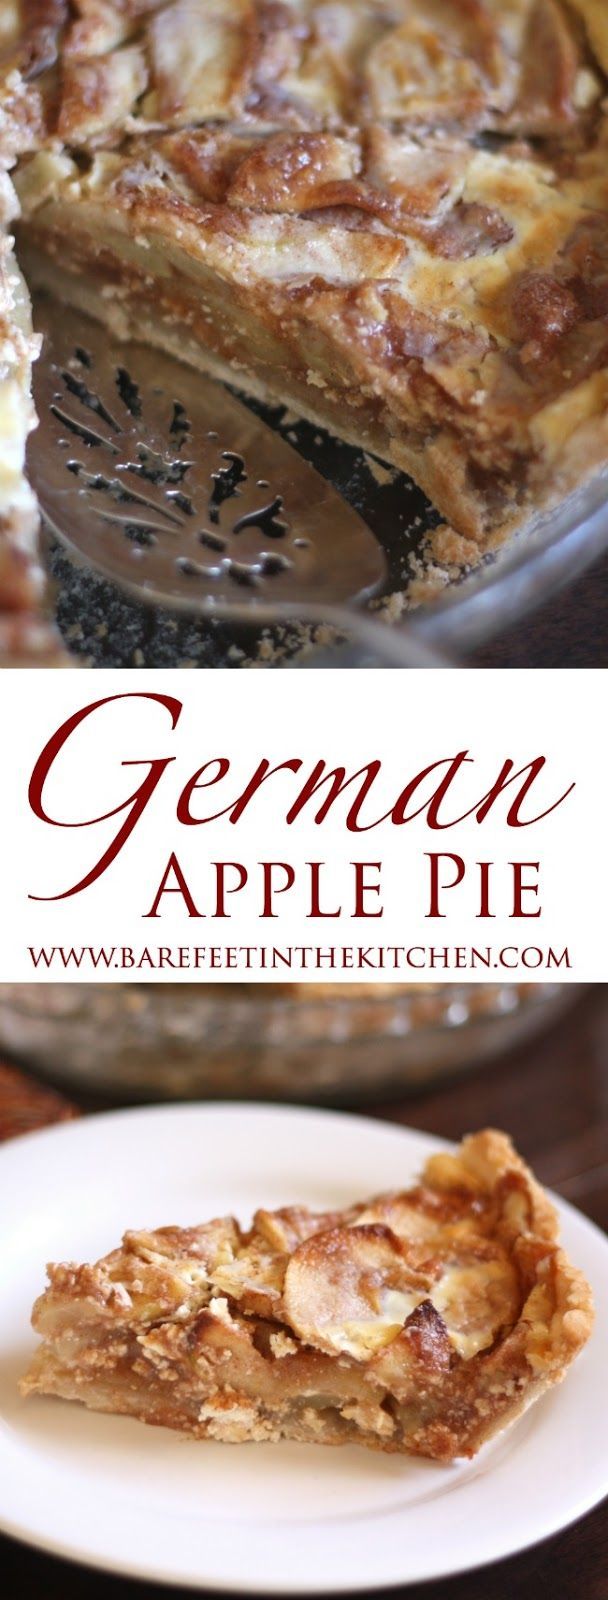 German Apple Pie is like no other apple pie you’ve ever tasted! – get the recipe at barefeetinthekitc.